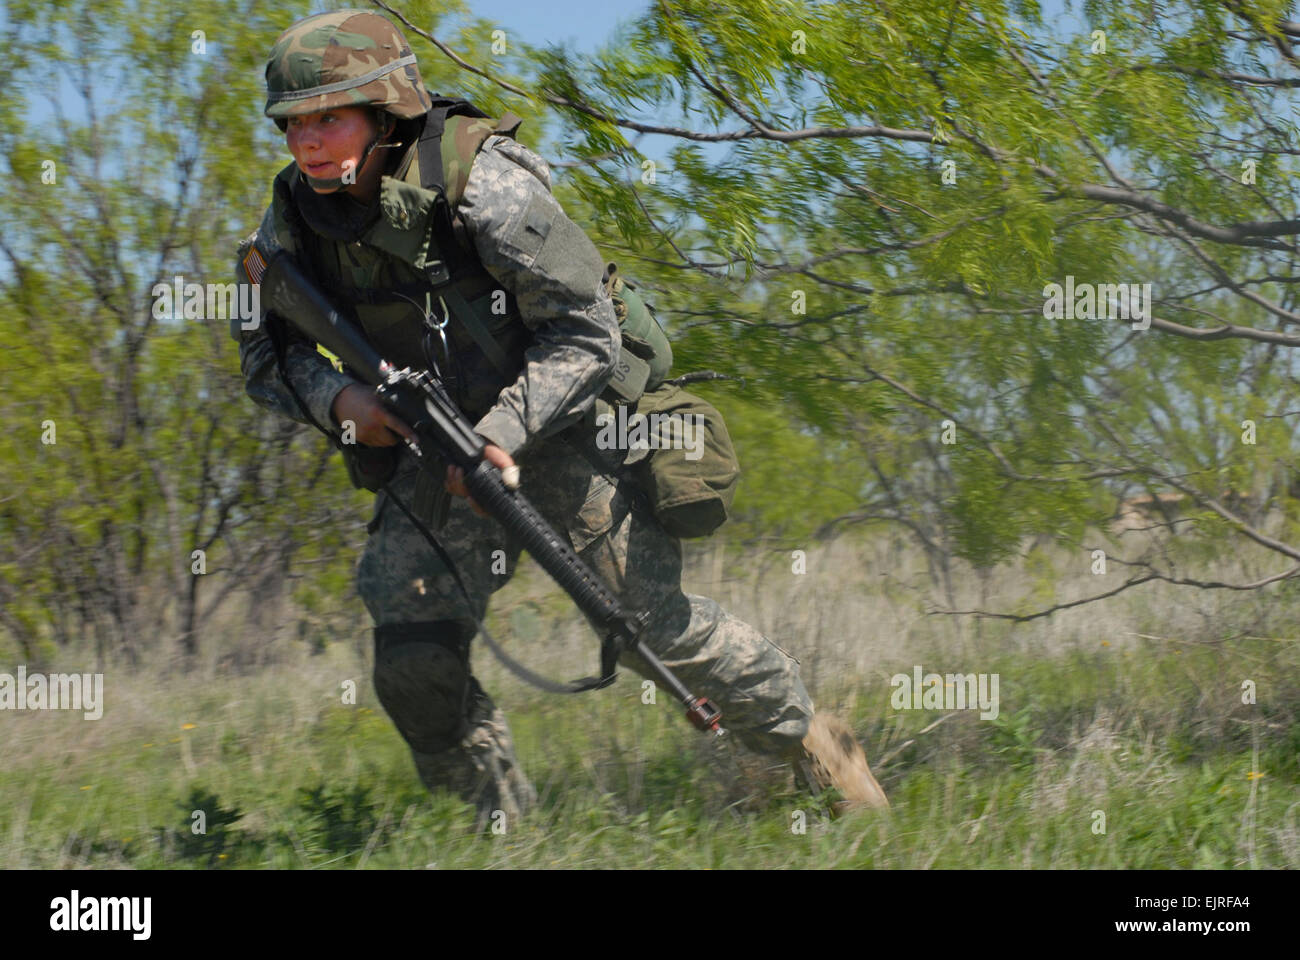 U.S. Army Pfc. Gabriella Ravensborg, of the 344th Military Intelligence Battallion, runs for cover during a field training exercise at Goodfellow Air Force Base, Texas, April 11, 2007. Soldiers assigned to the 344th MIB are required to complete training to prepare them for combat situations.   Airman 1st Class Kamaile O. Chan Stock Photo